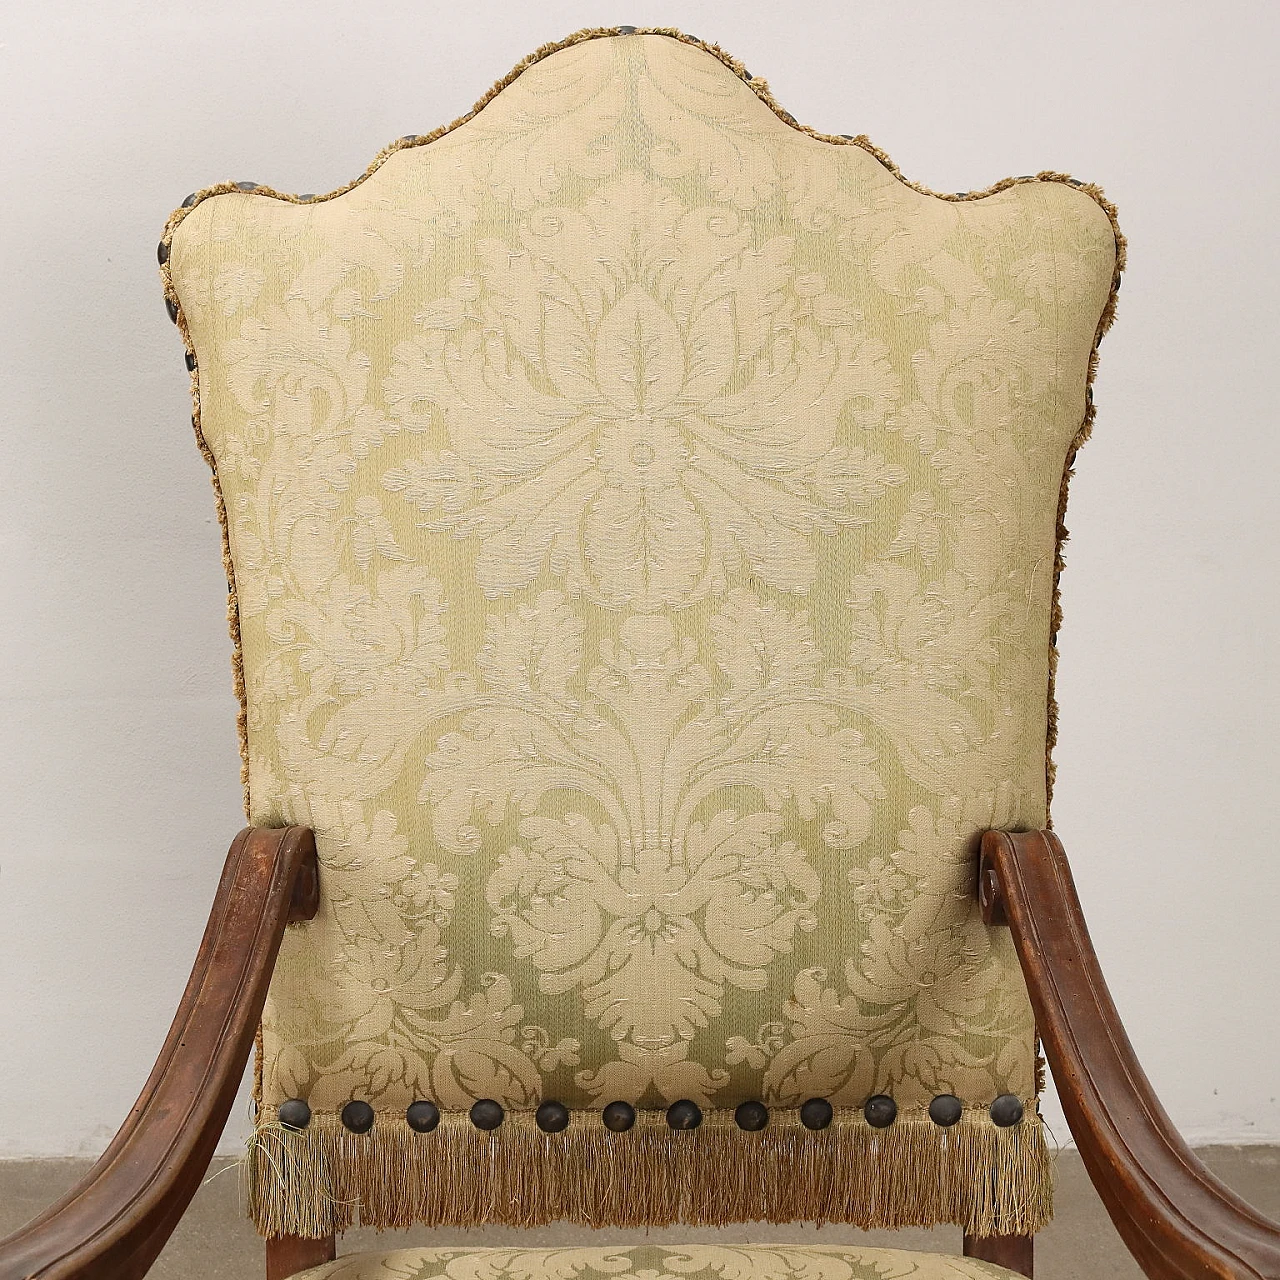 4 Carved wooden chairs, padded with brocade fabric, 19th century 4